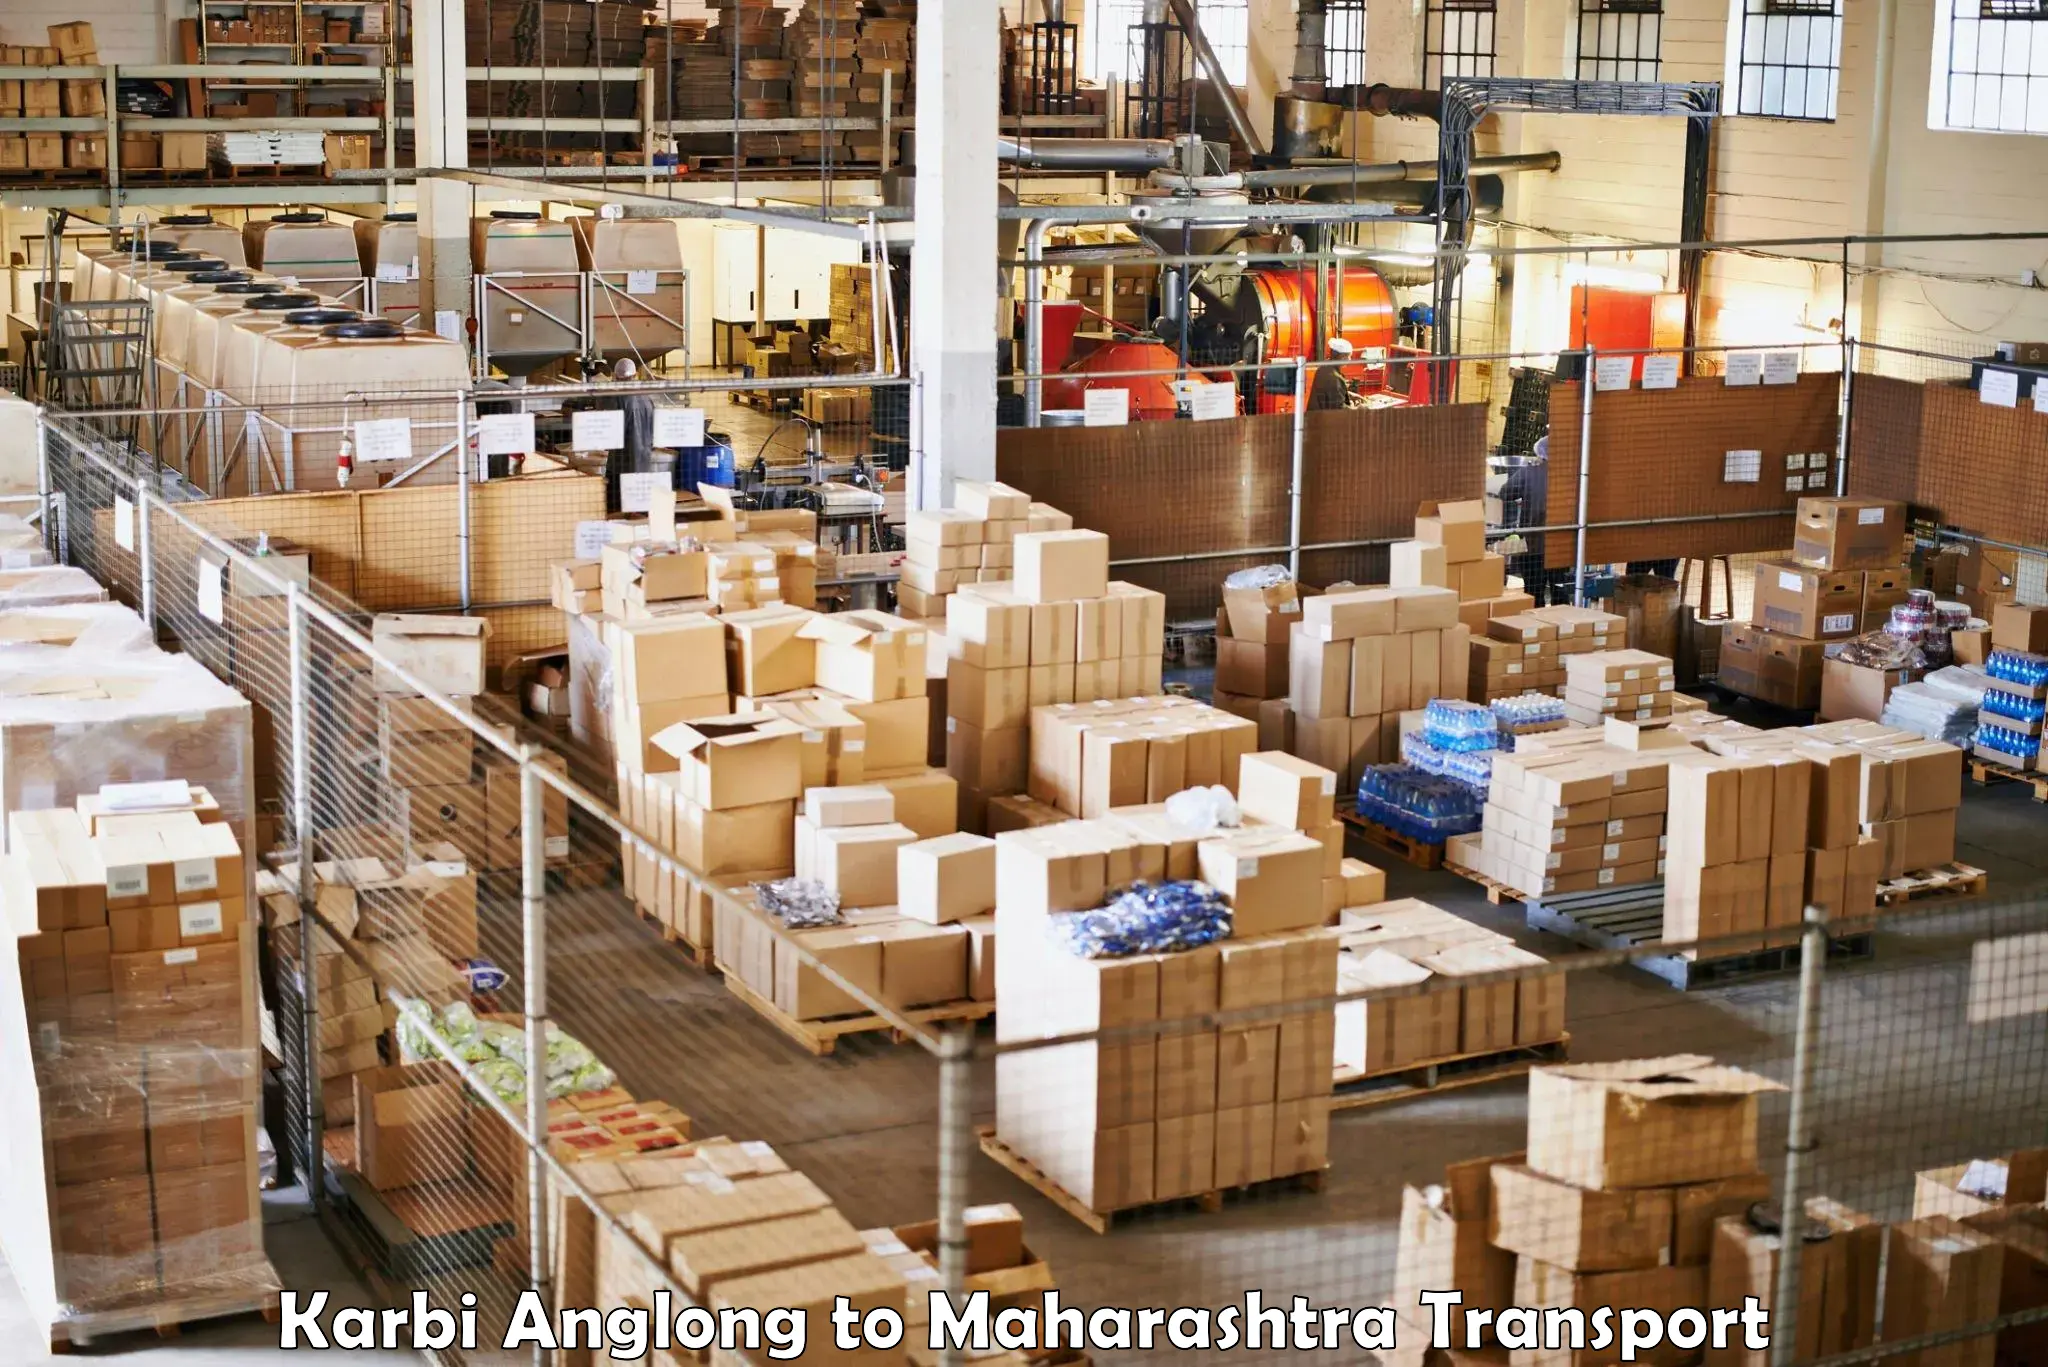 Truck transport companies in India Karbi Anglong to Masrul